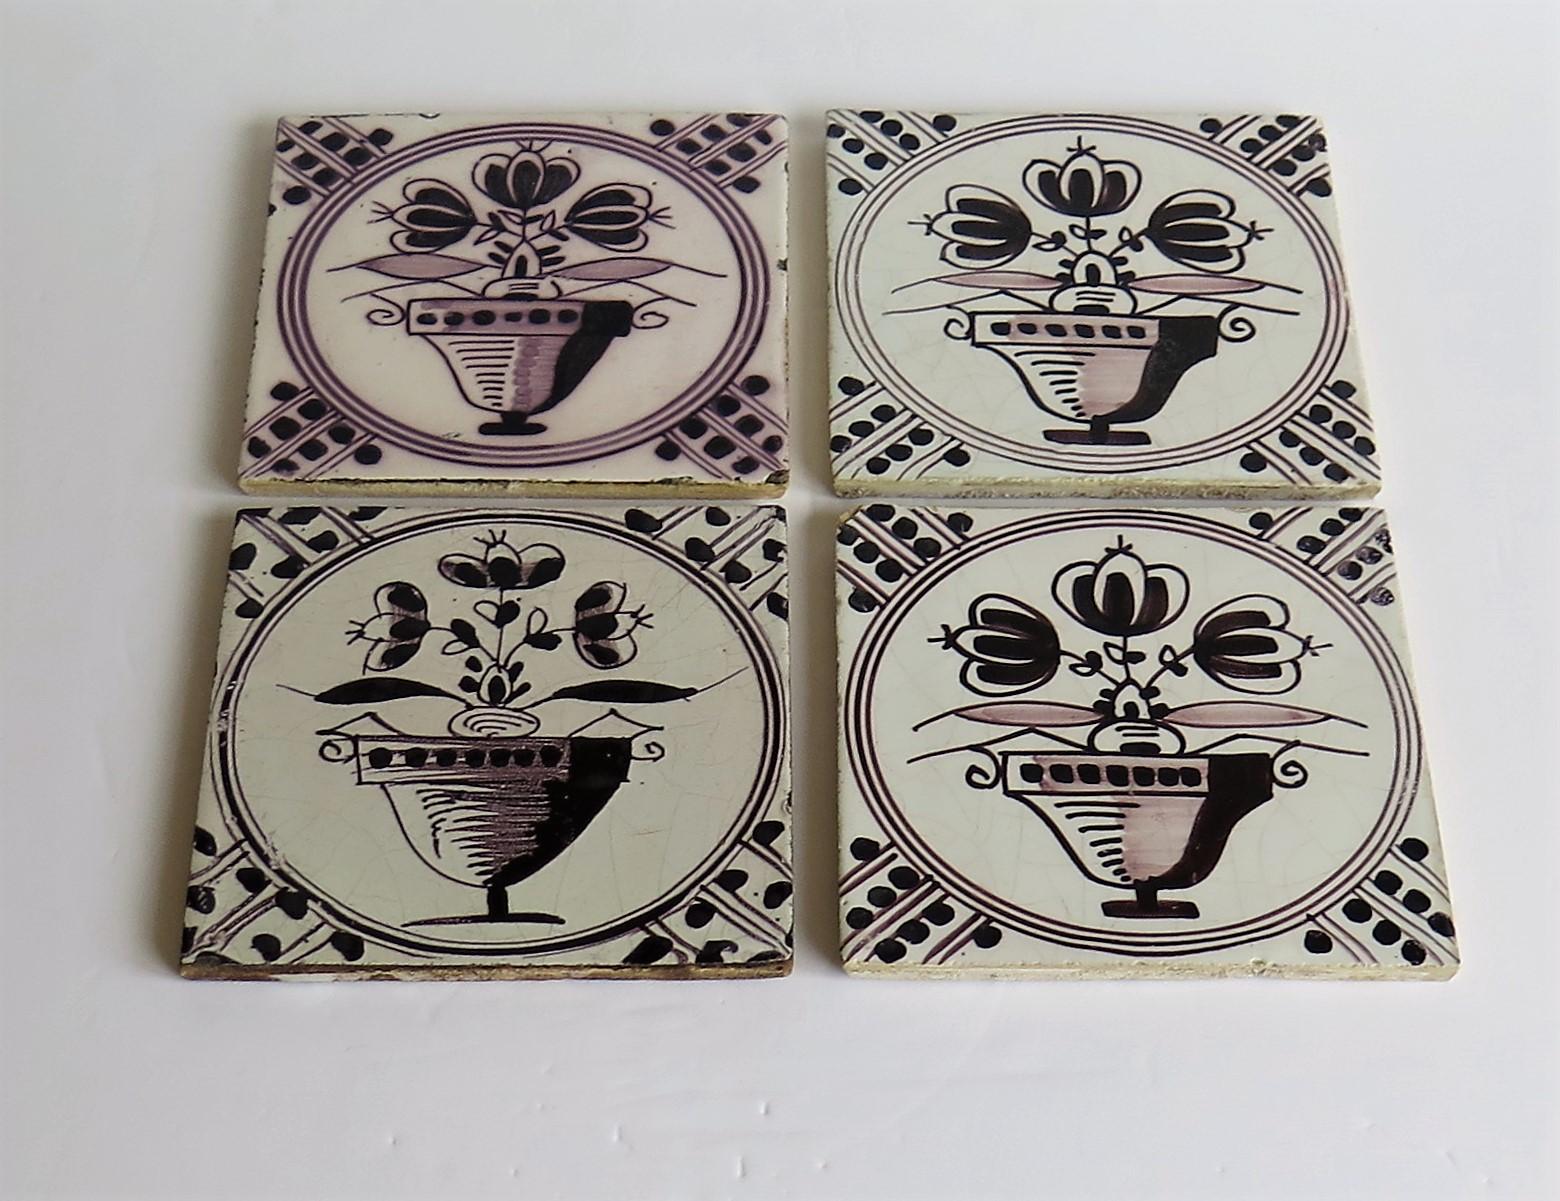 These are a SET of FOUR delft ceramic wall tiles, all with a very decorative manganese flower bowl pattern, made in the Netherlands and dating to the mid 19th century or possibly earlier.

The tiles are very decorative and nominally 5 inches square